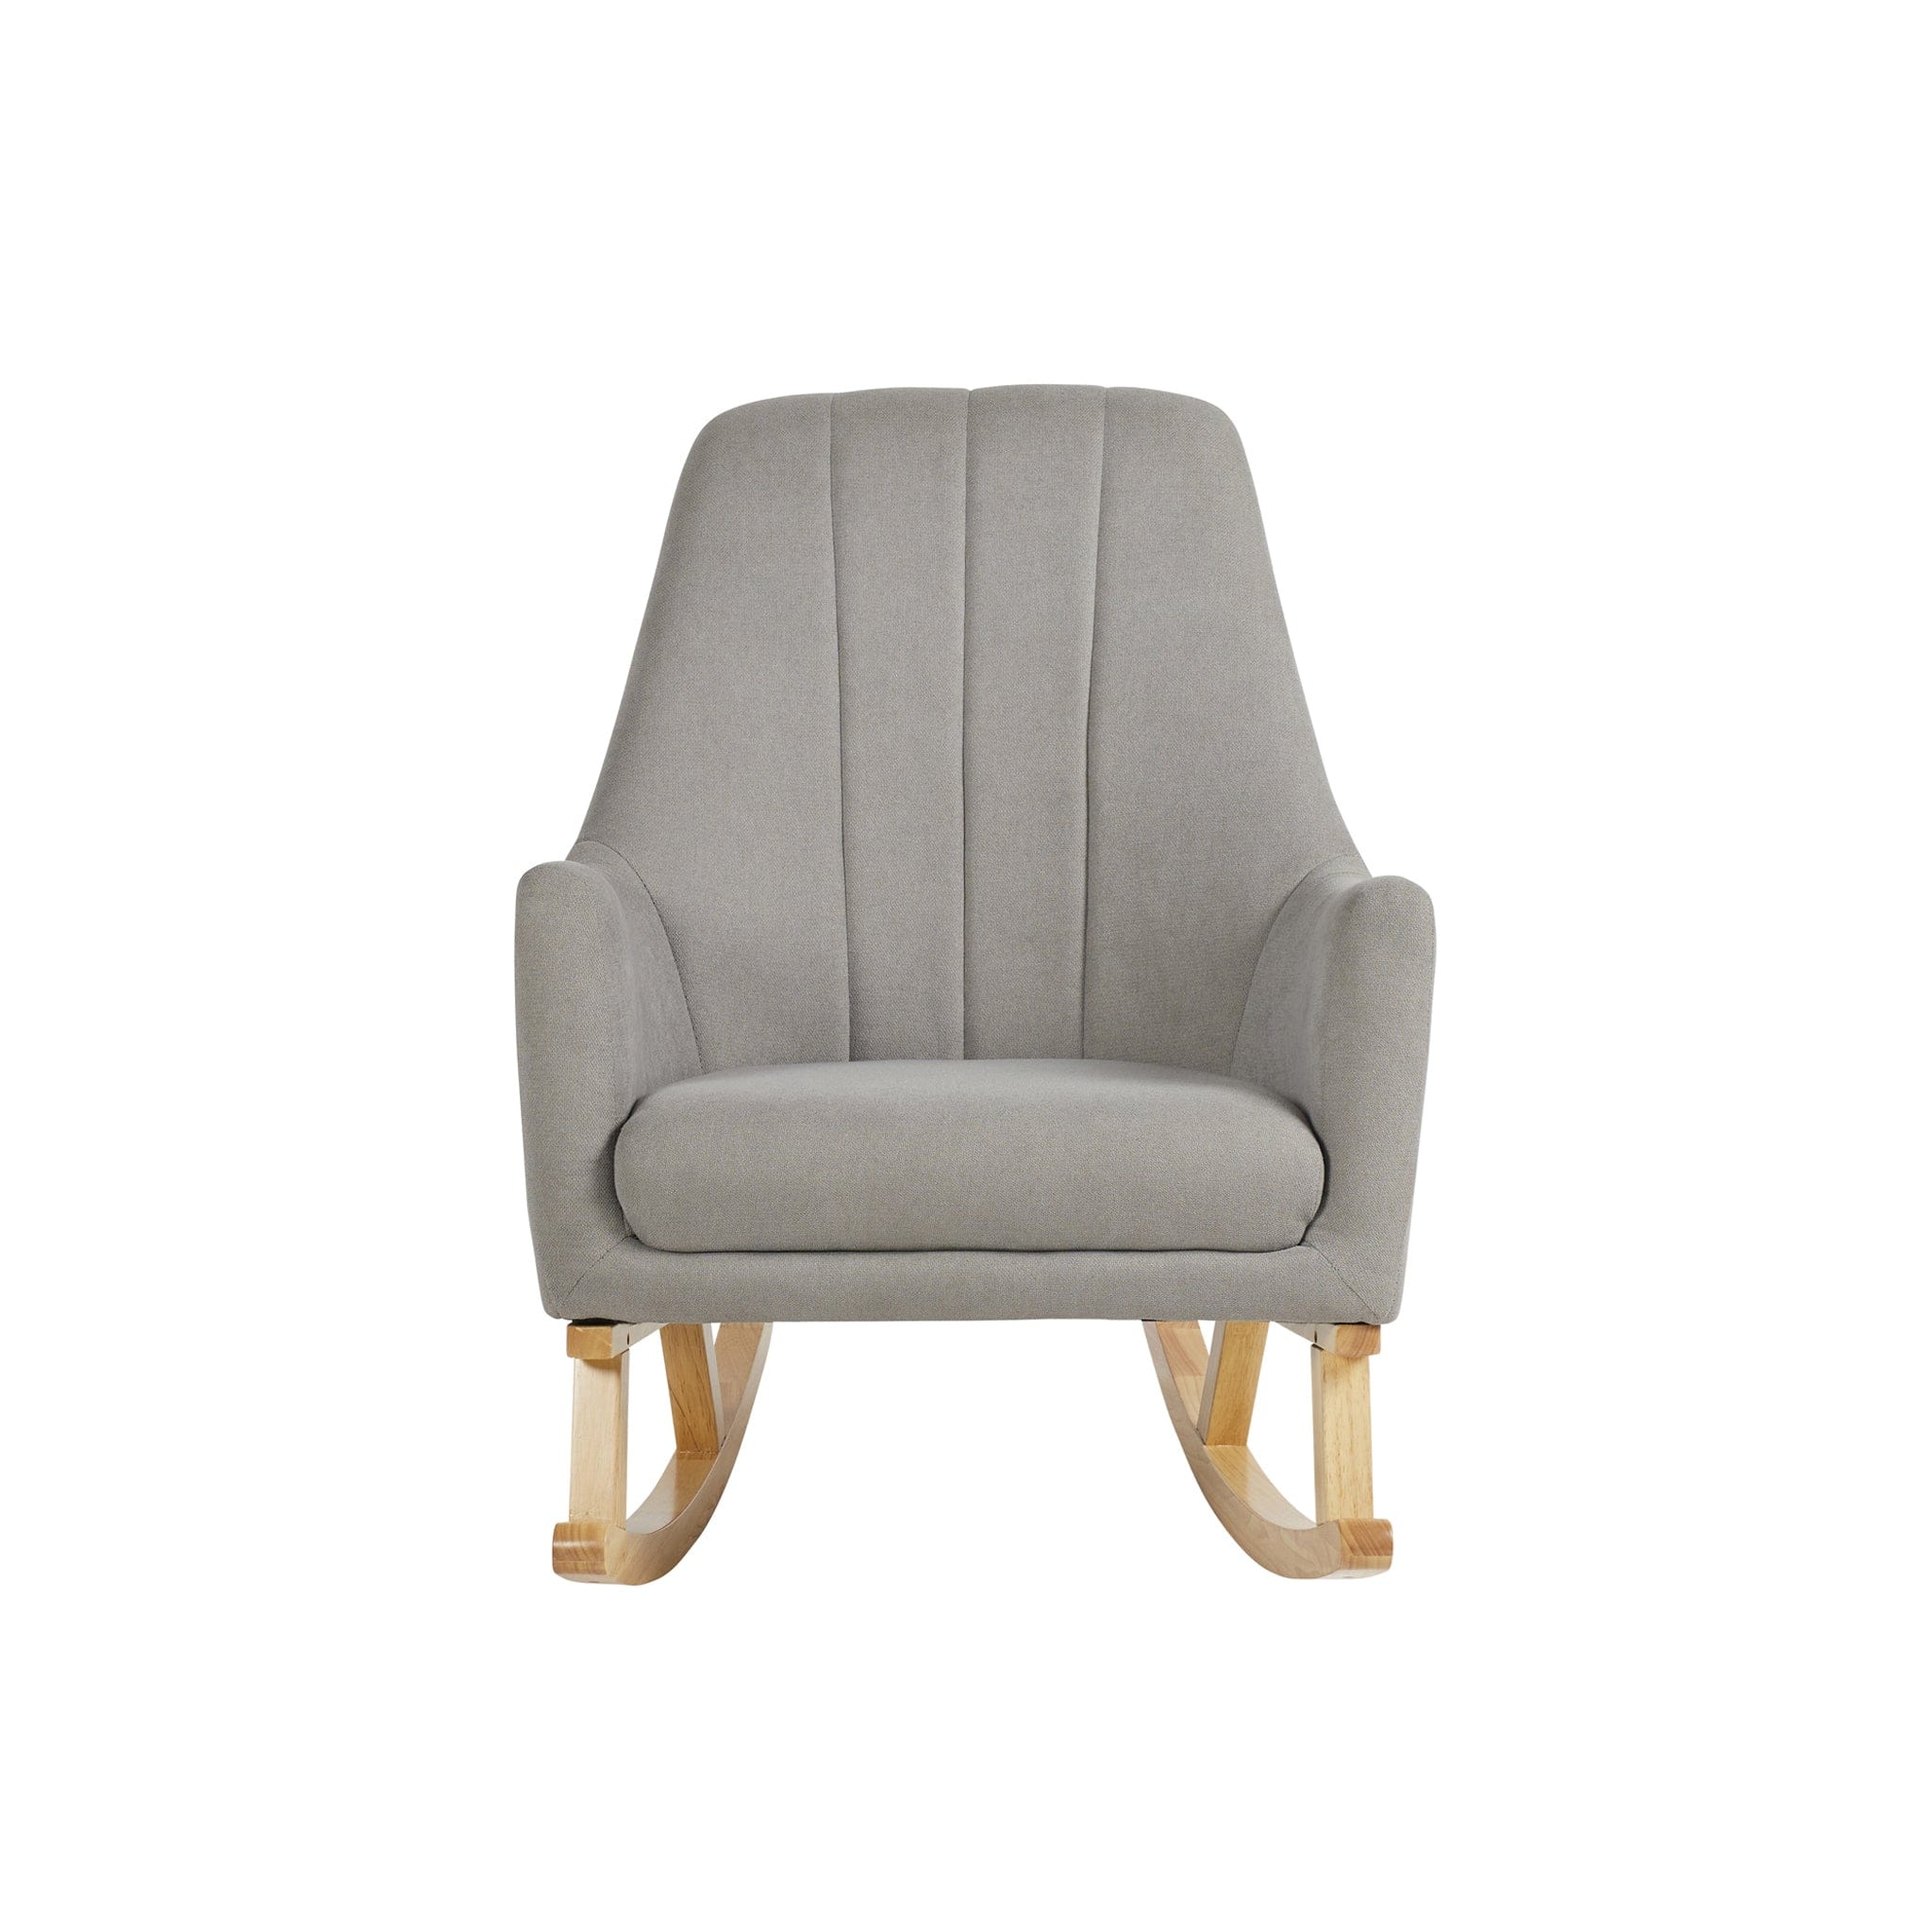 Ickle Bubba Nursing Chairs Ickle Bubba Eden Deluxe Nursery Chair and Stool Pearl Grey 48-008-000-840